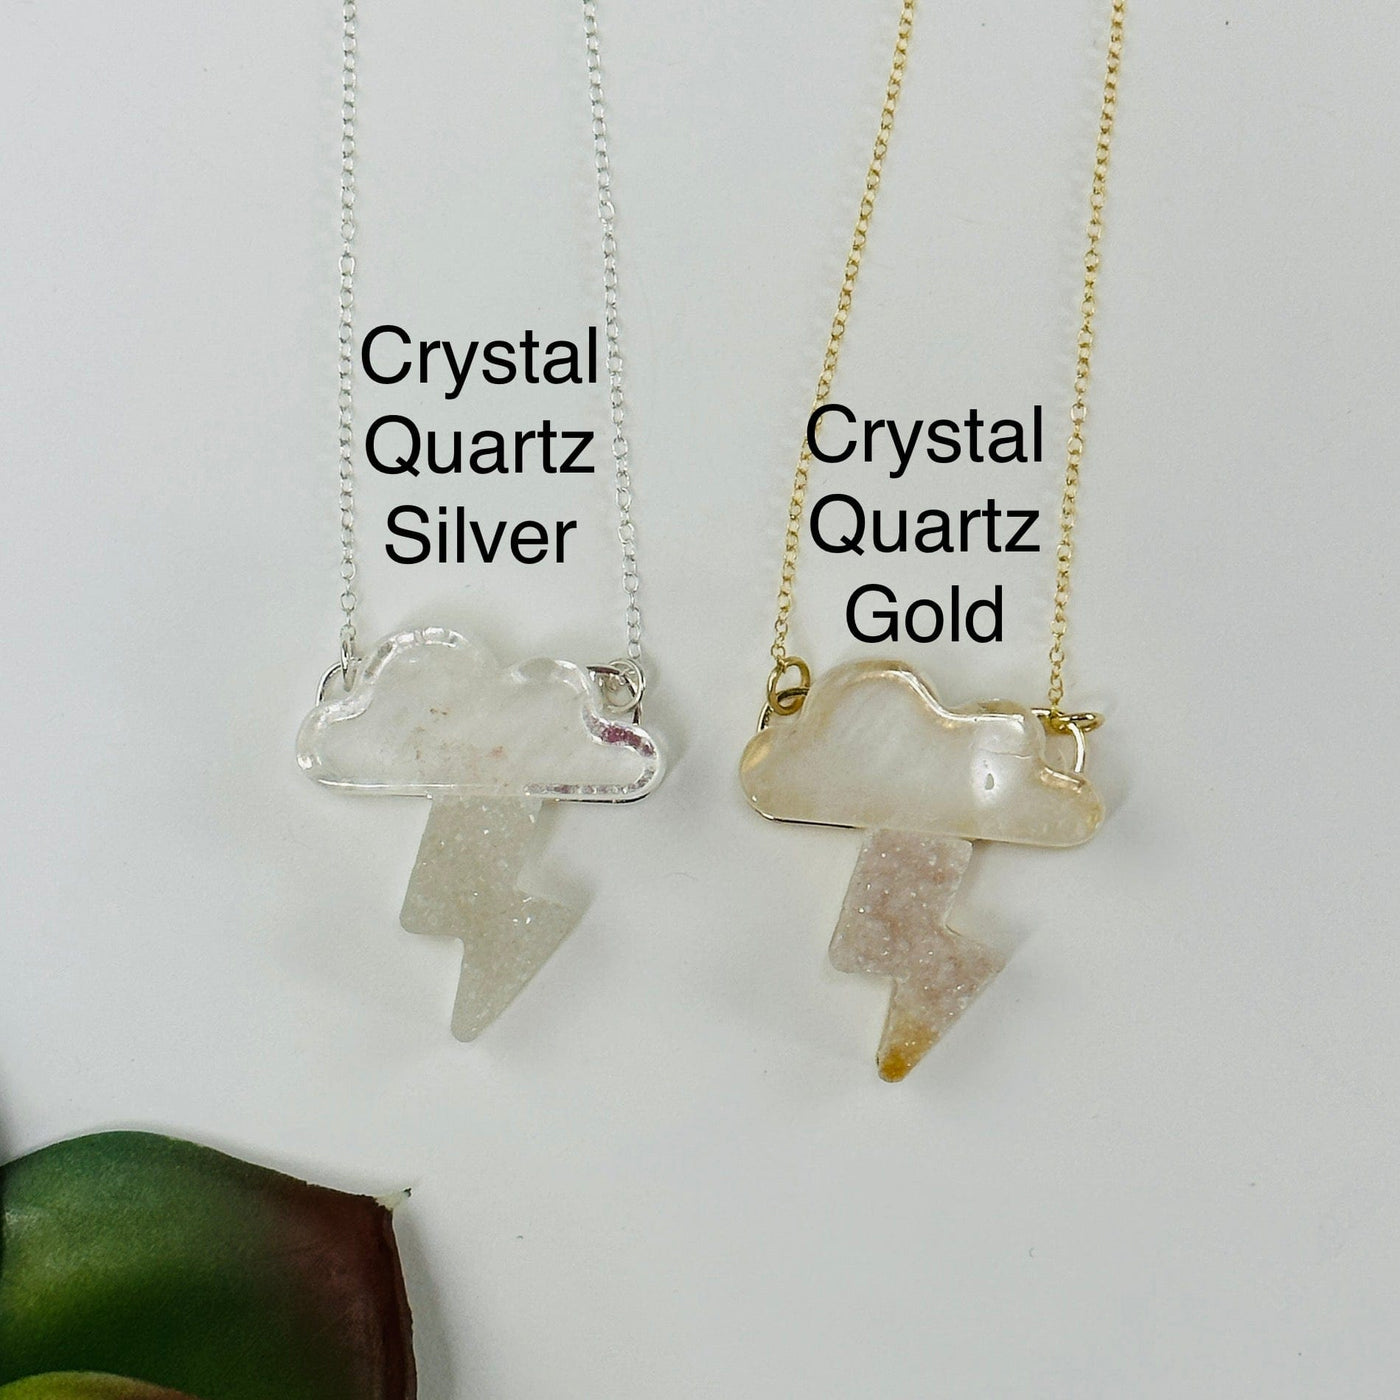 crystal quartz variant in both gold and silver on white background